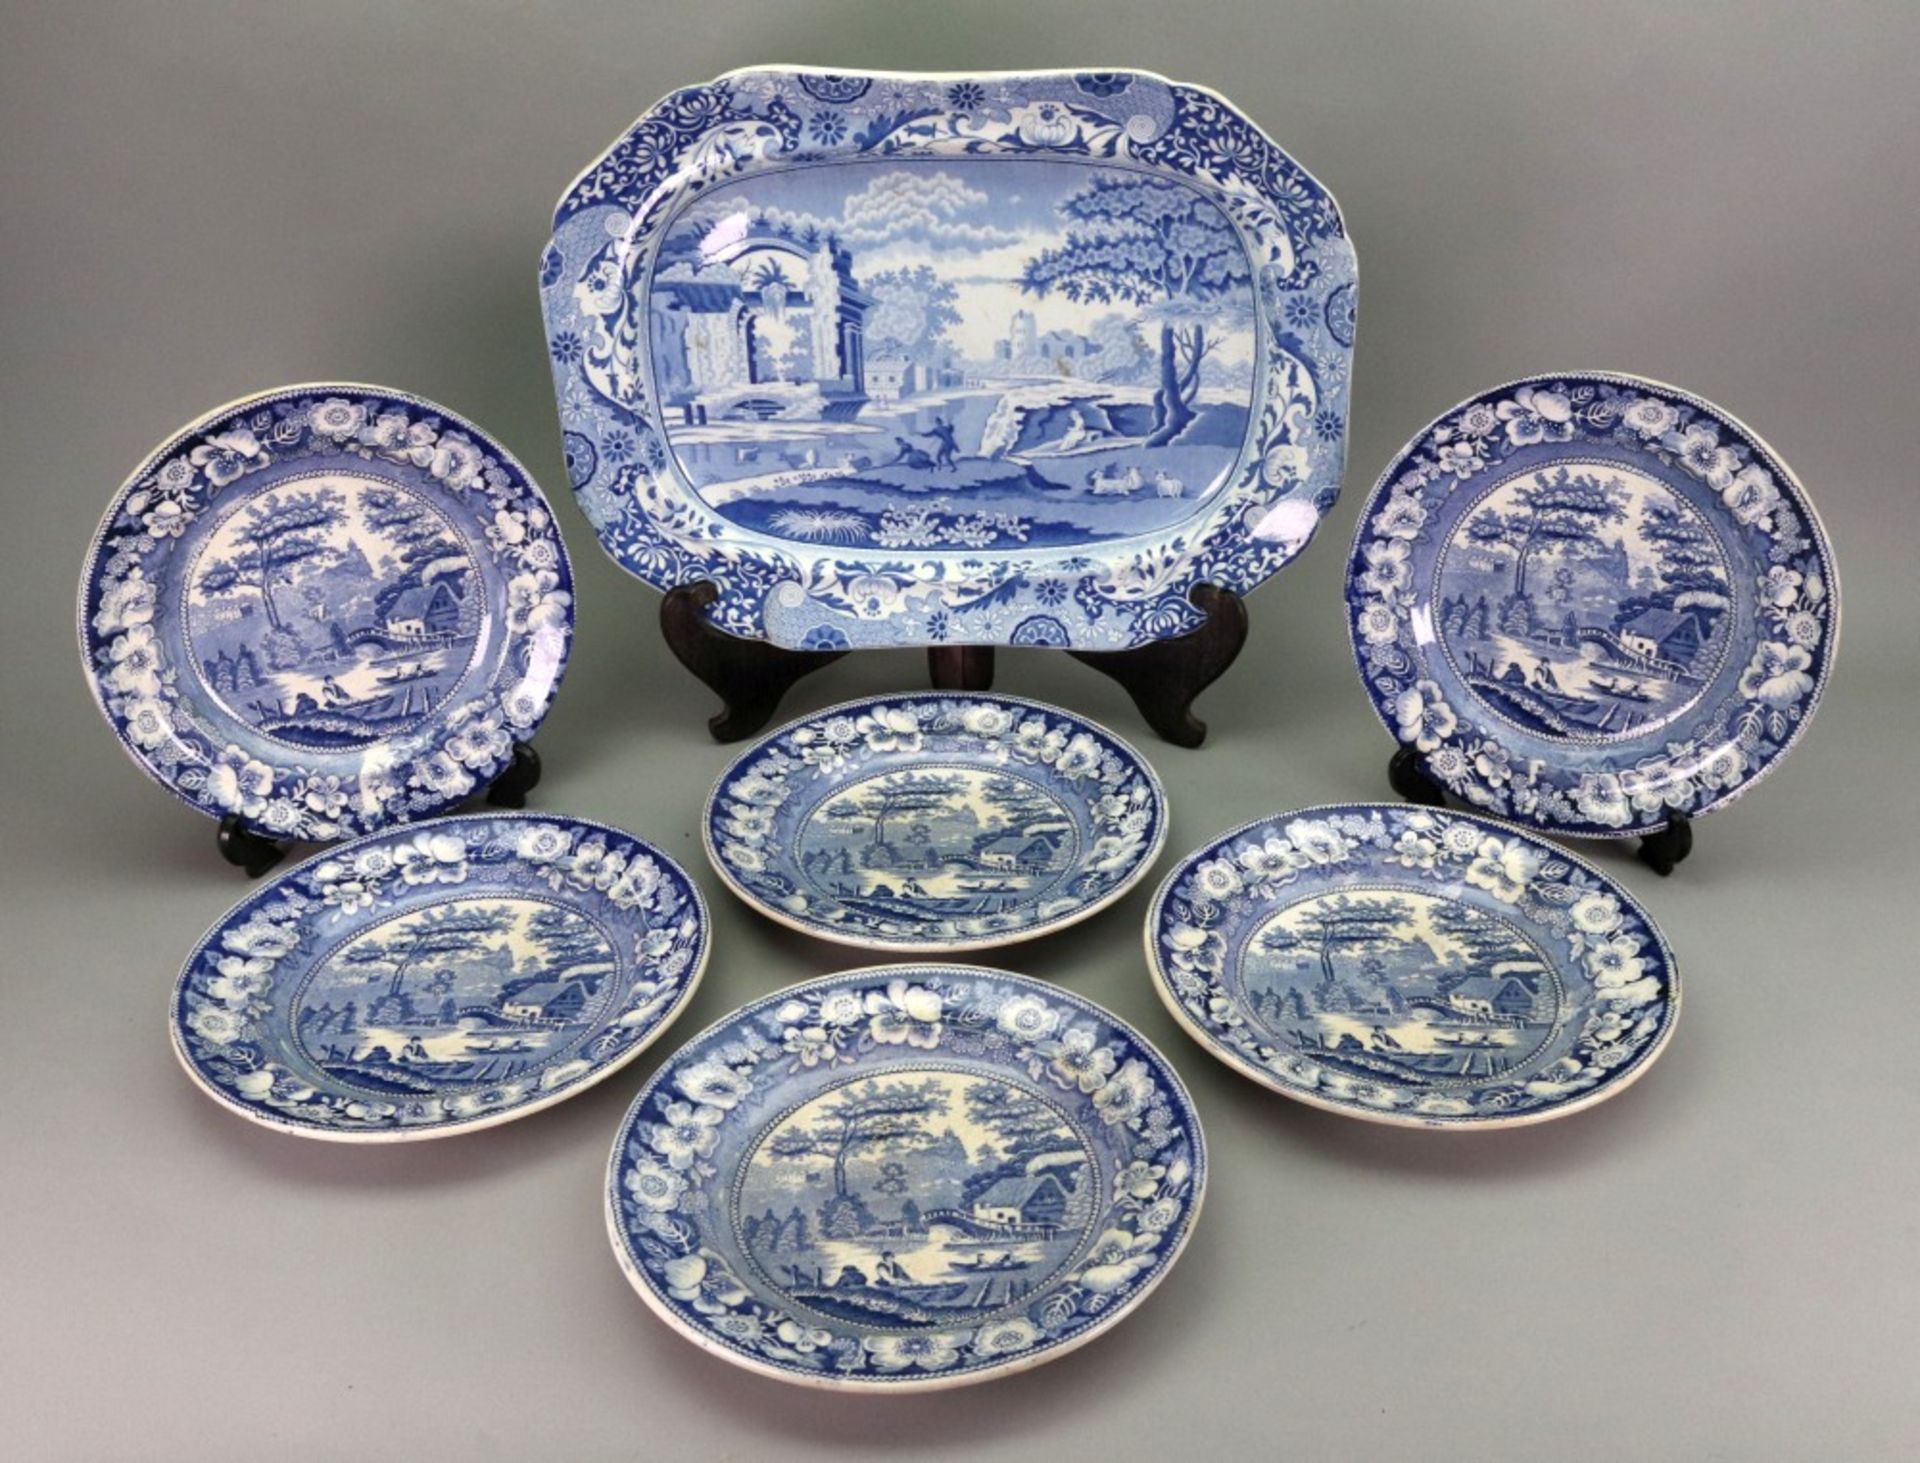 An English blue and white earthenware meat plate, early 19th century,